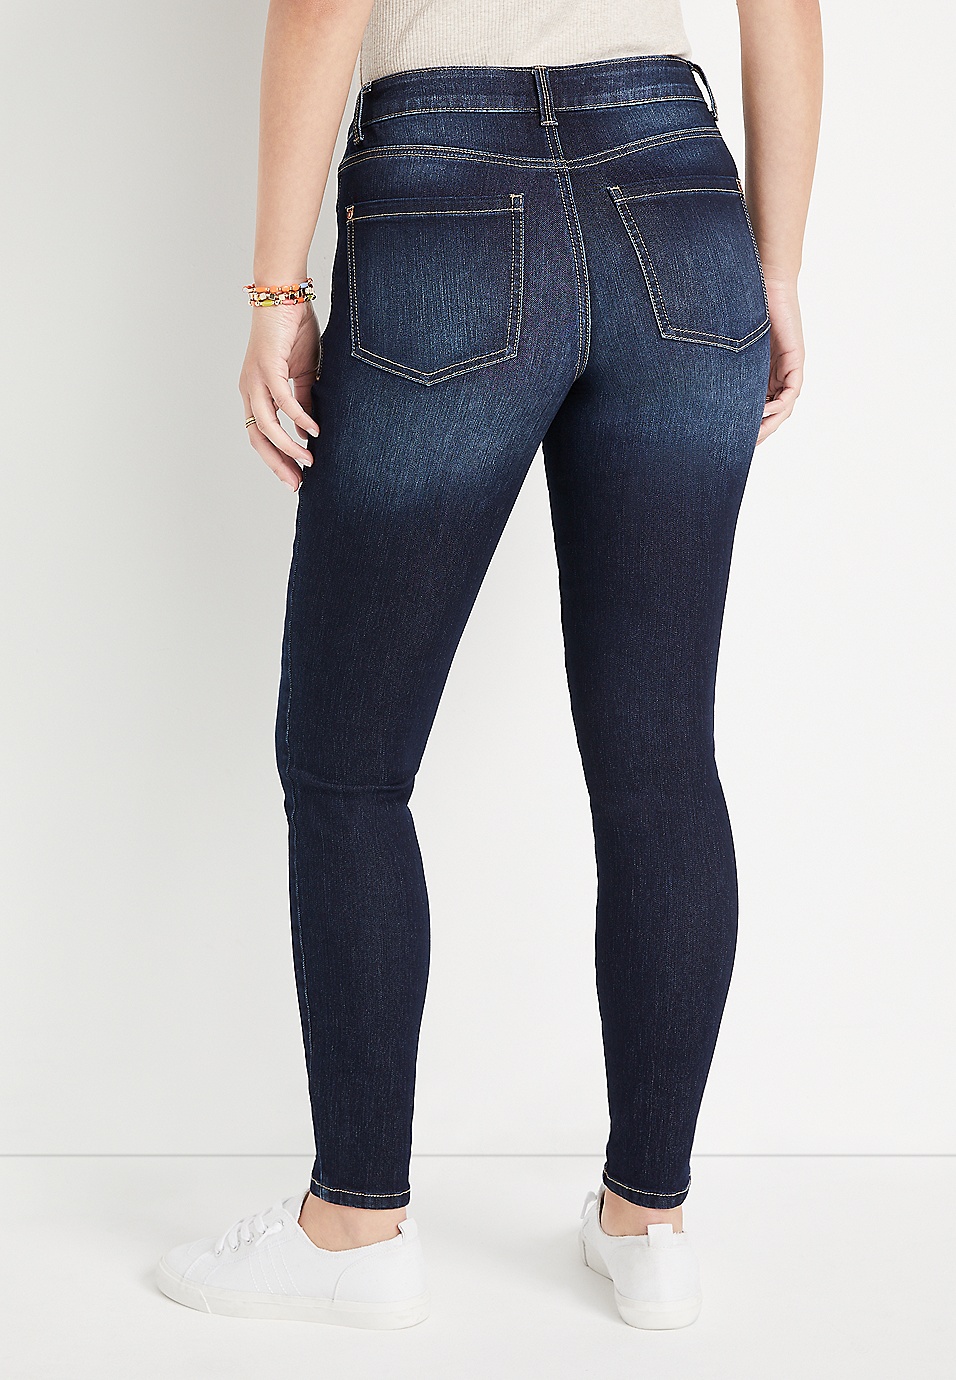 m by maurices™ Everflex™ Super Skinny High Rise Stretch Jean maurices